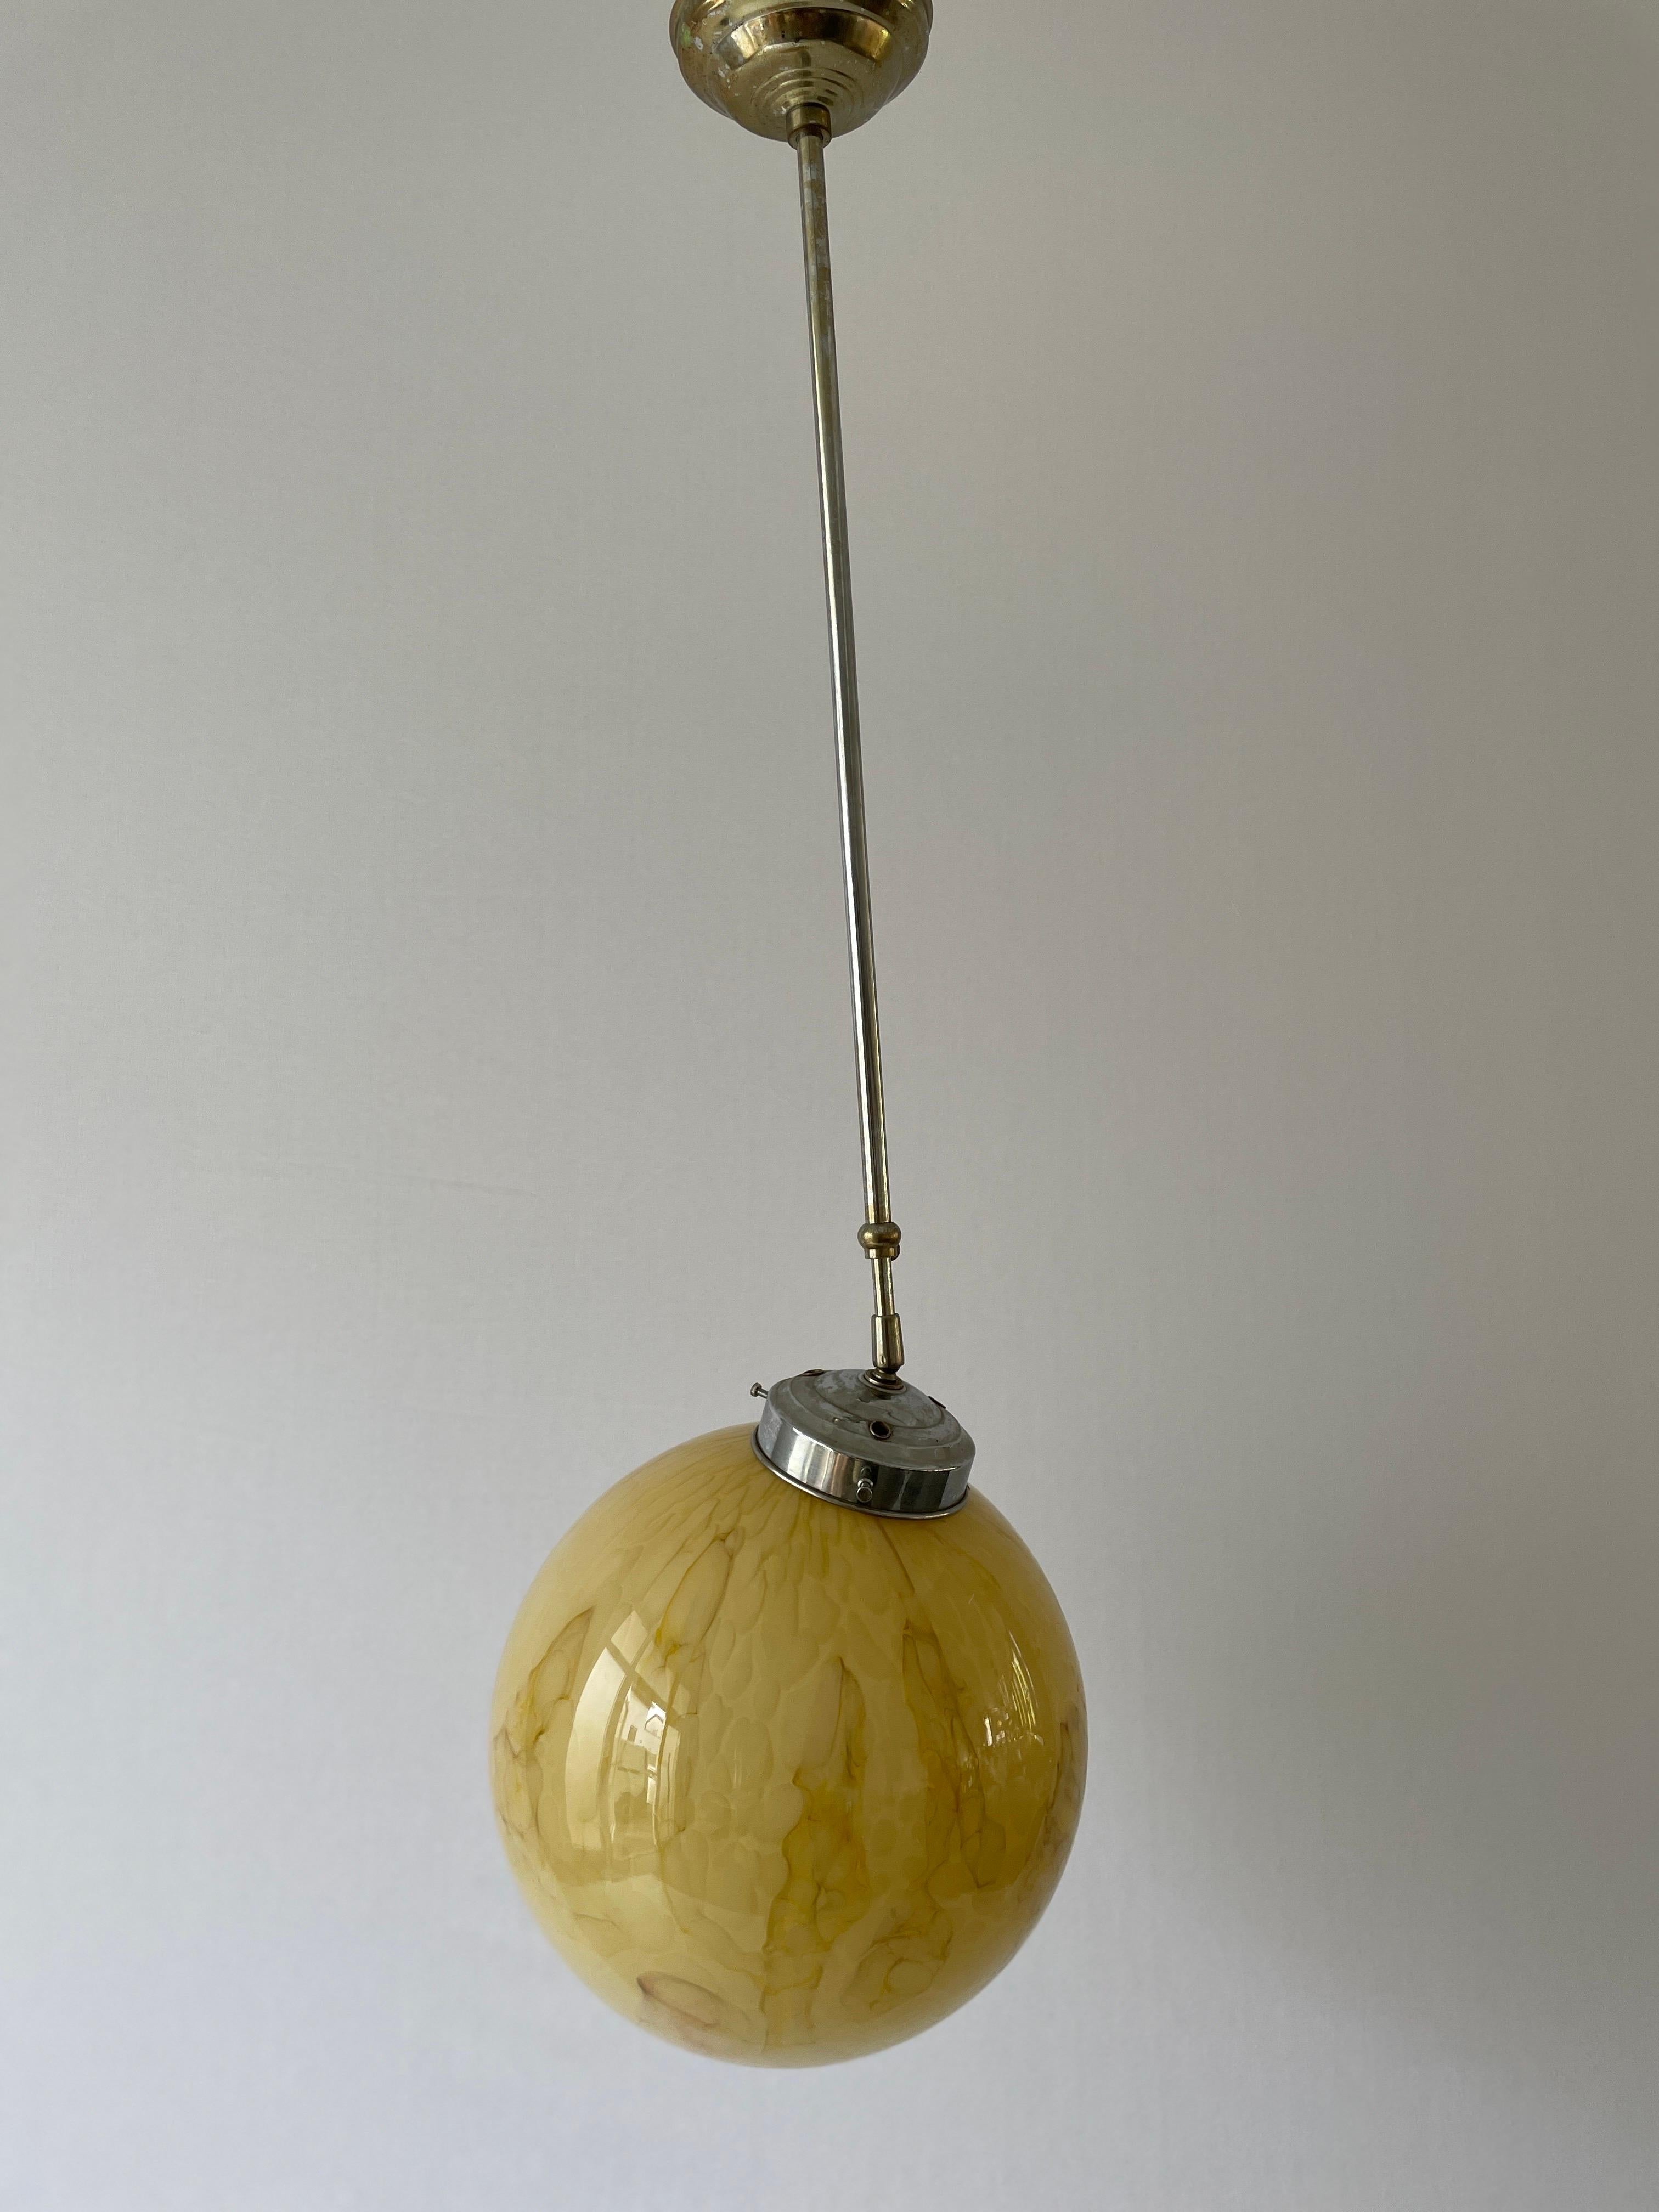 Art Deco Exceptional Church Lamp with Yellow Glass Ball , 1930s, Germany For Sale 1